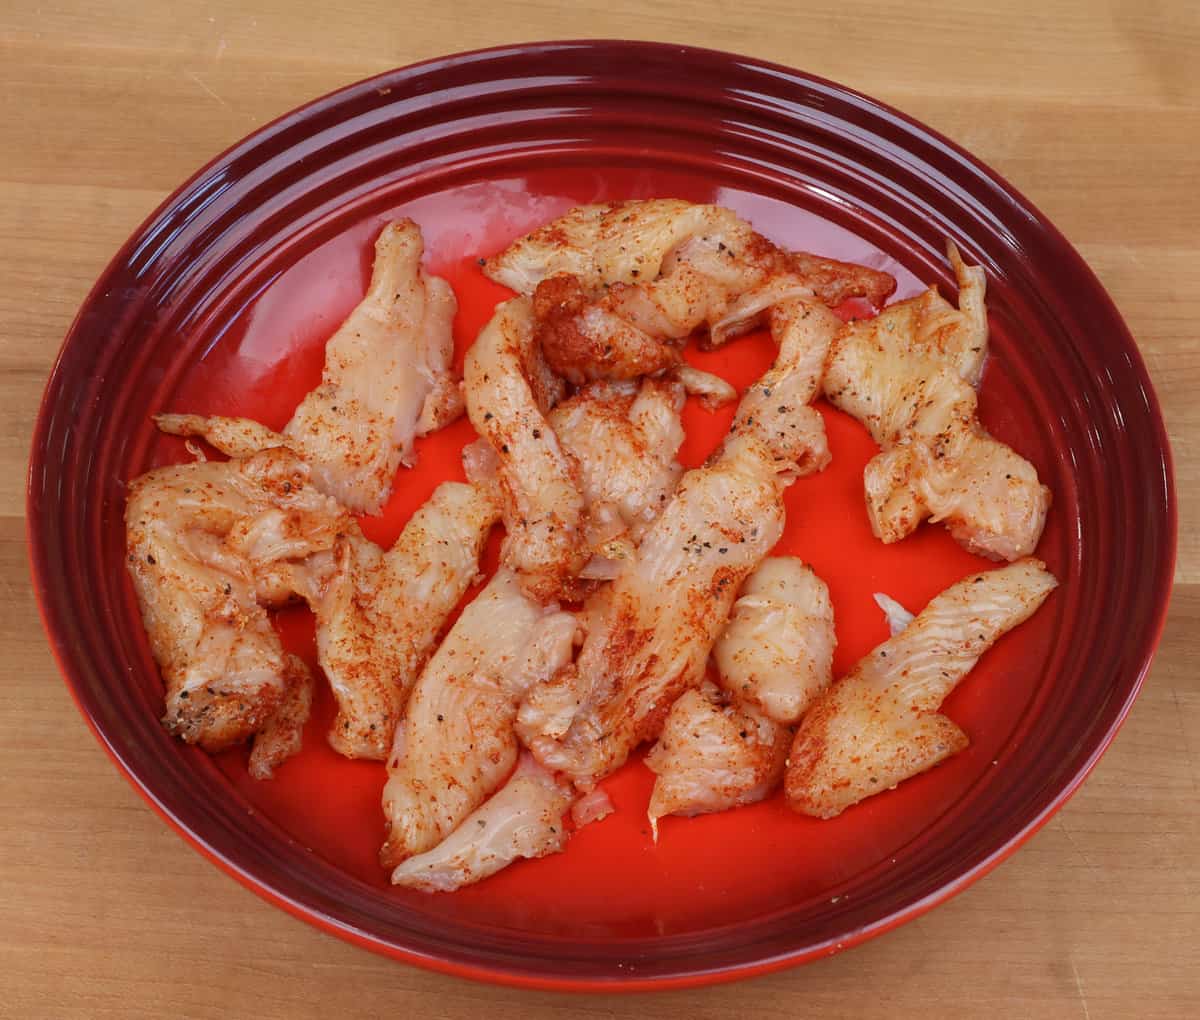 chicken pieces seasoned with paprika in a red bowl.